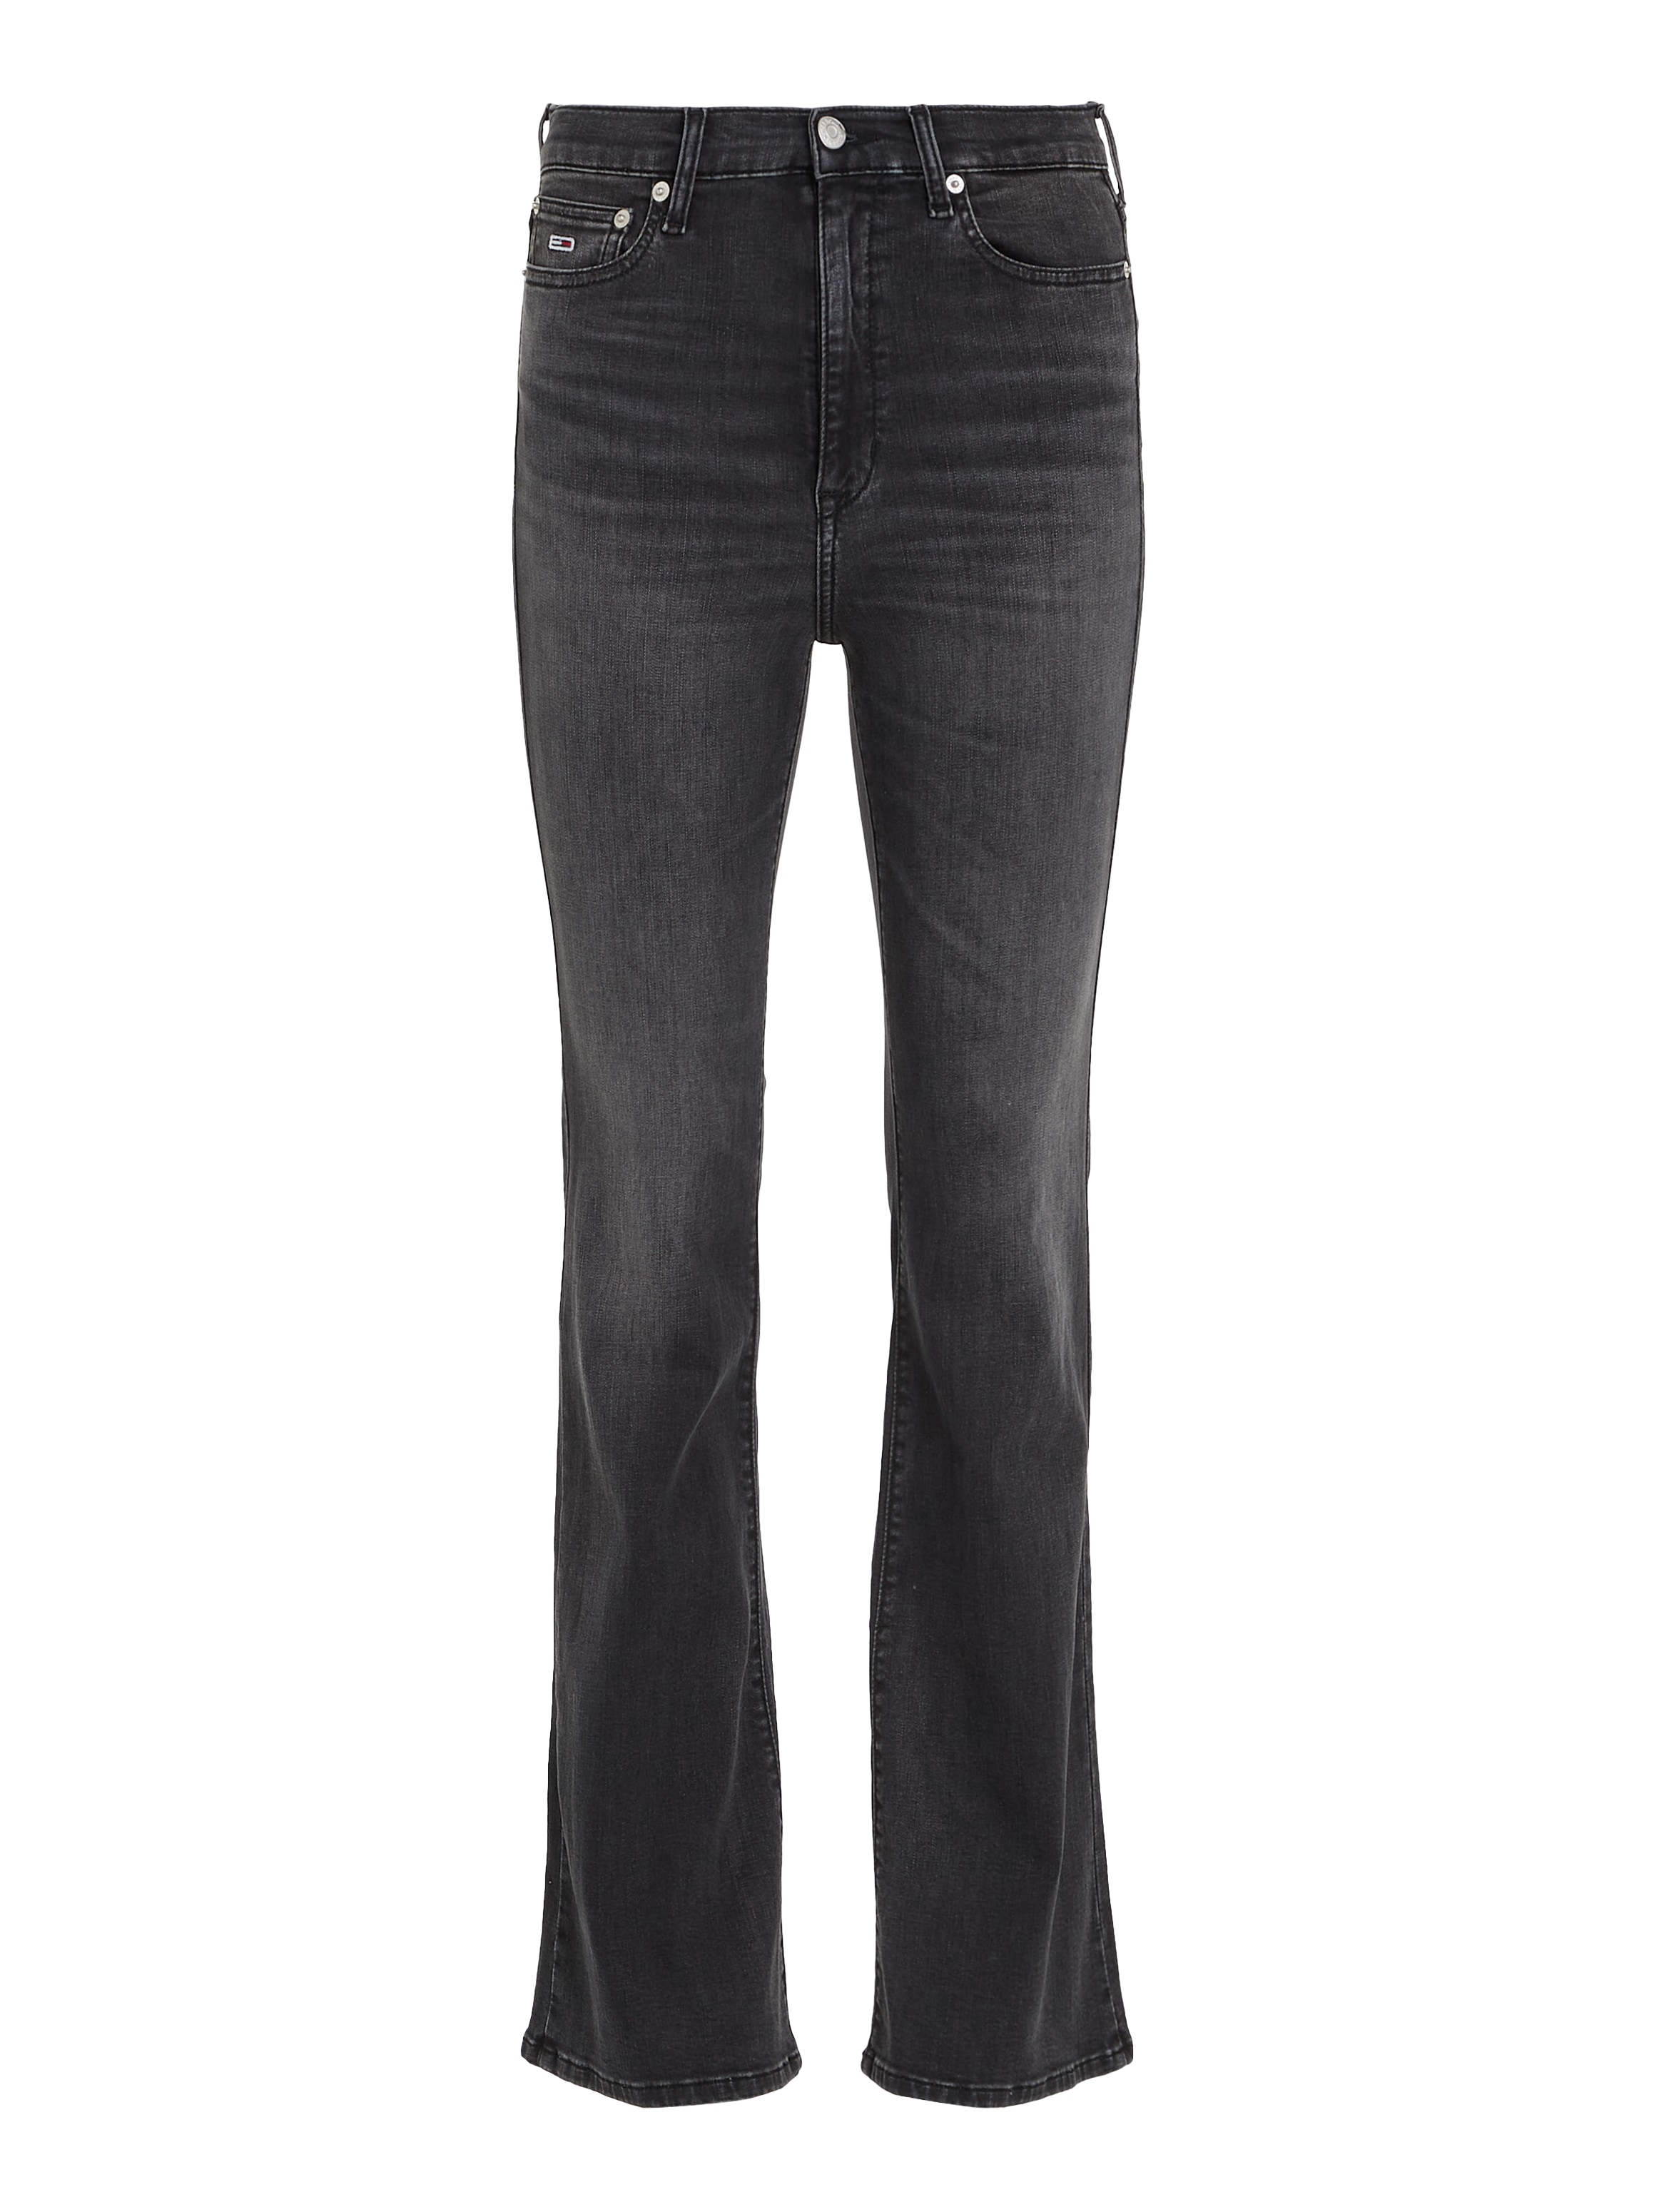 OTTOversand bei Bequeme Markenlabel Tommy »Sylvia«, Jeans mit Jeans